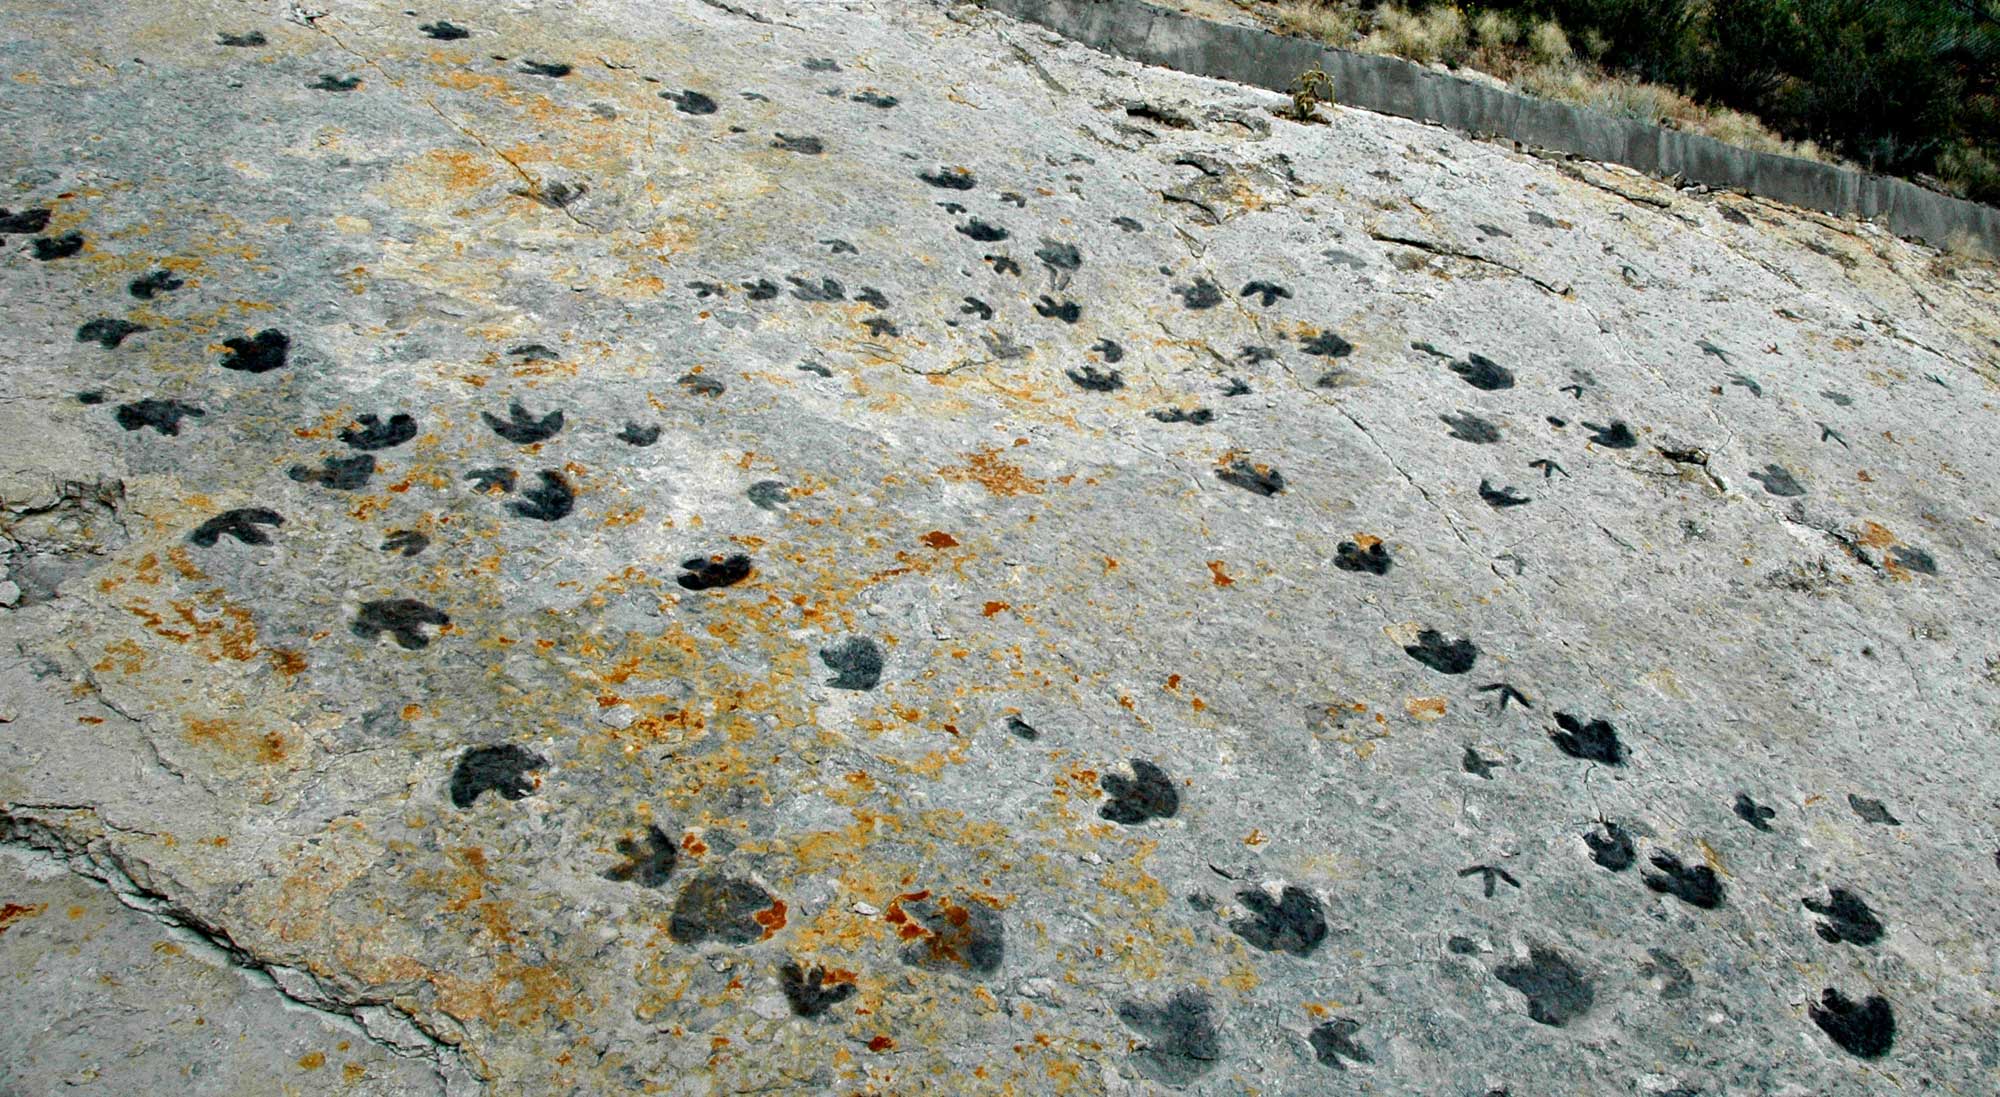 Photography of dinosaur trackways at Dinosaur Ridge in Colorado. The photo shows numerous three-toed tracks preserved in stone.